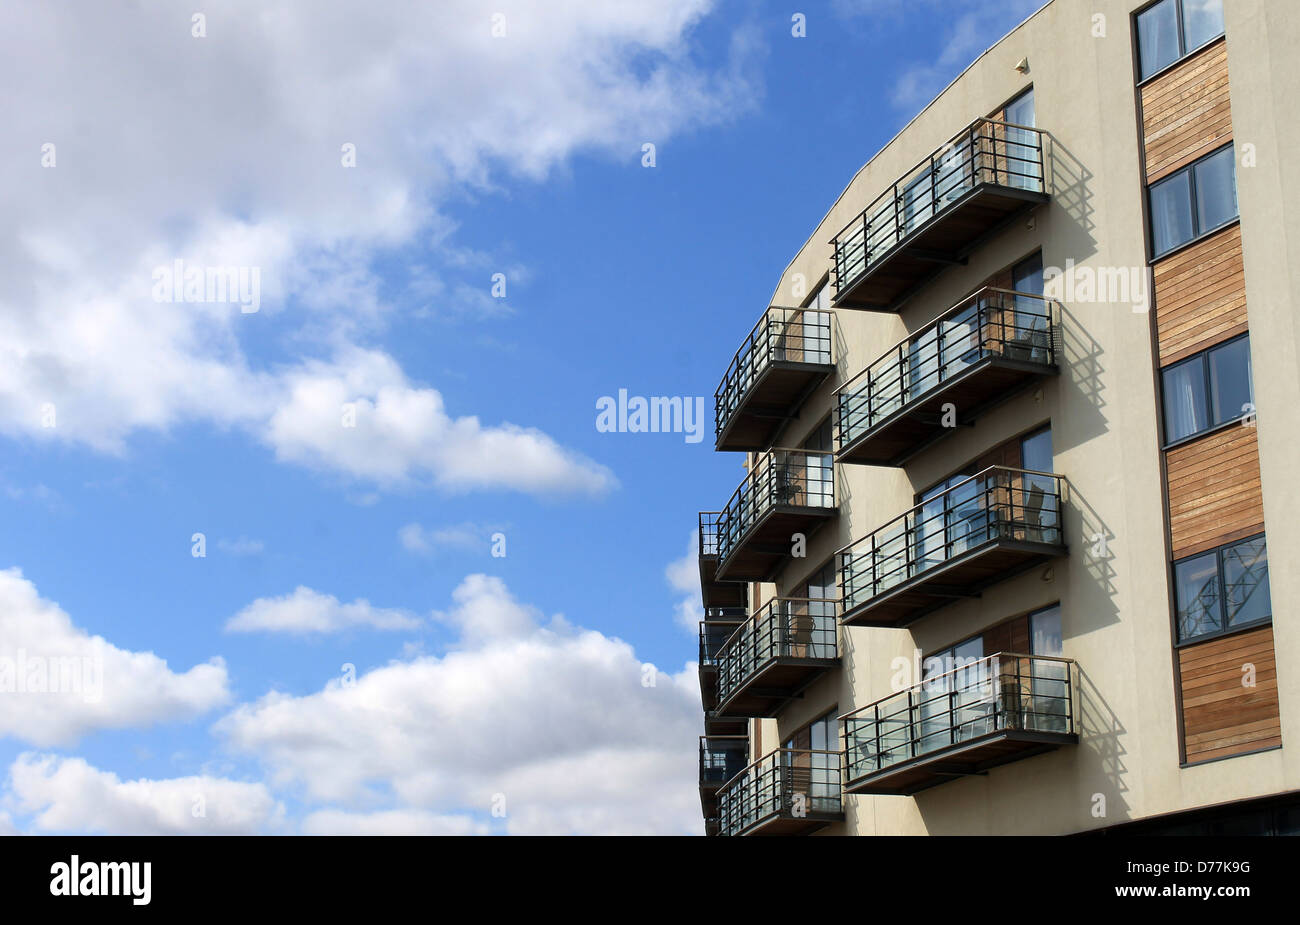 Exterior of curving modern apartment building with blue sky and cloudscape background. Stock Photo